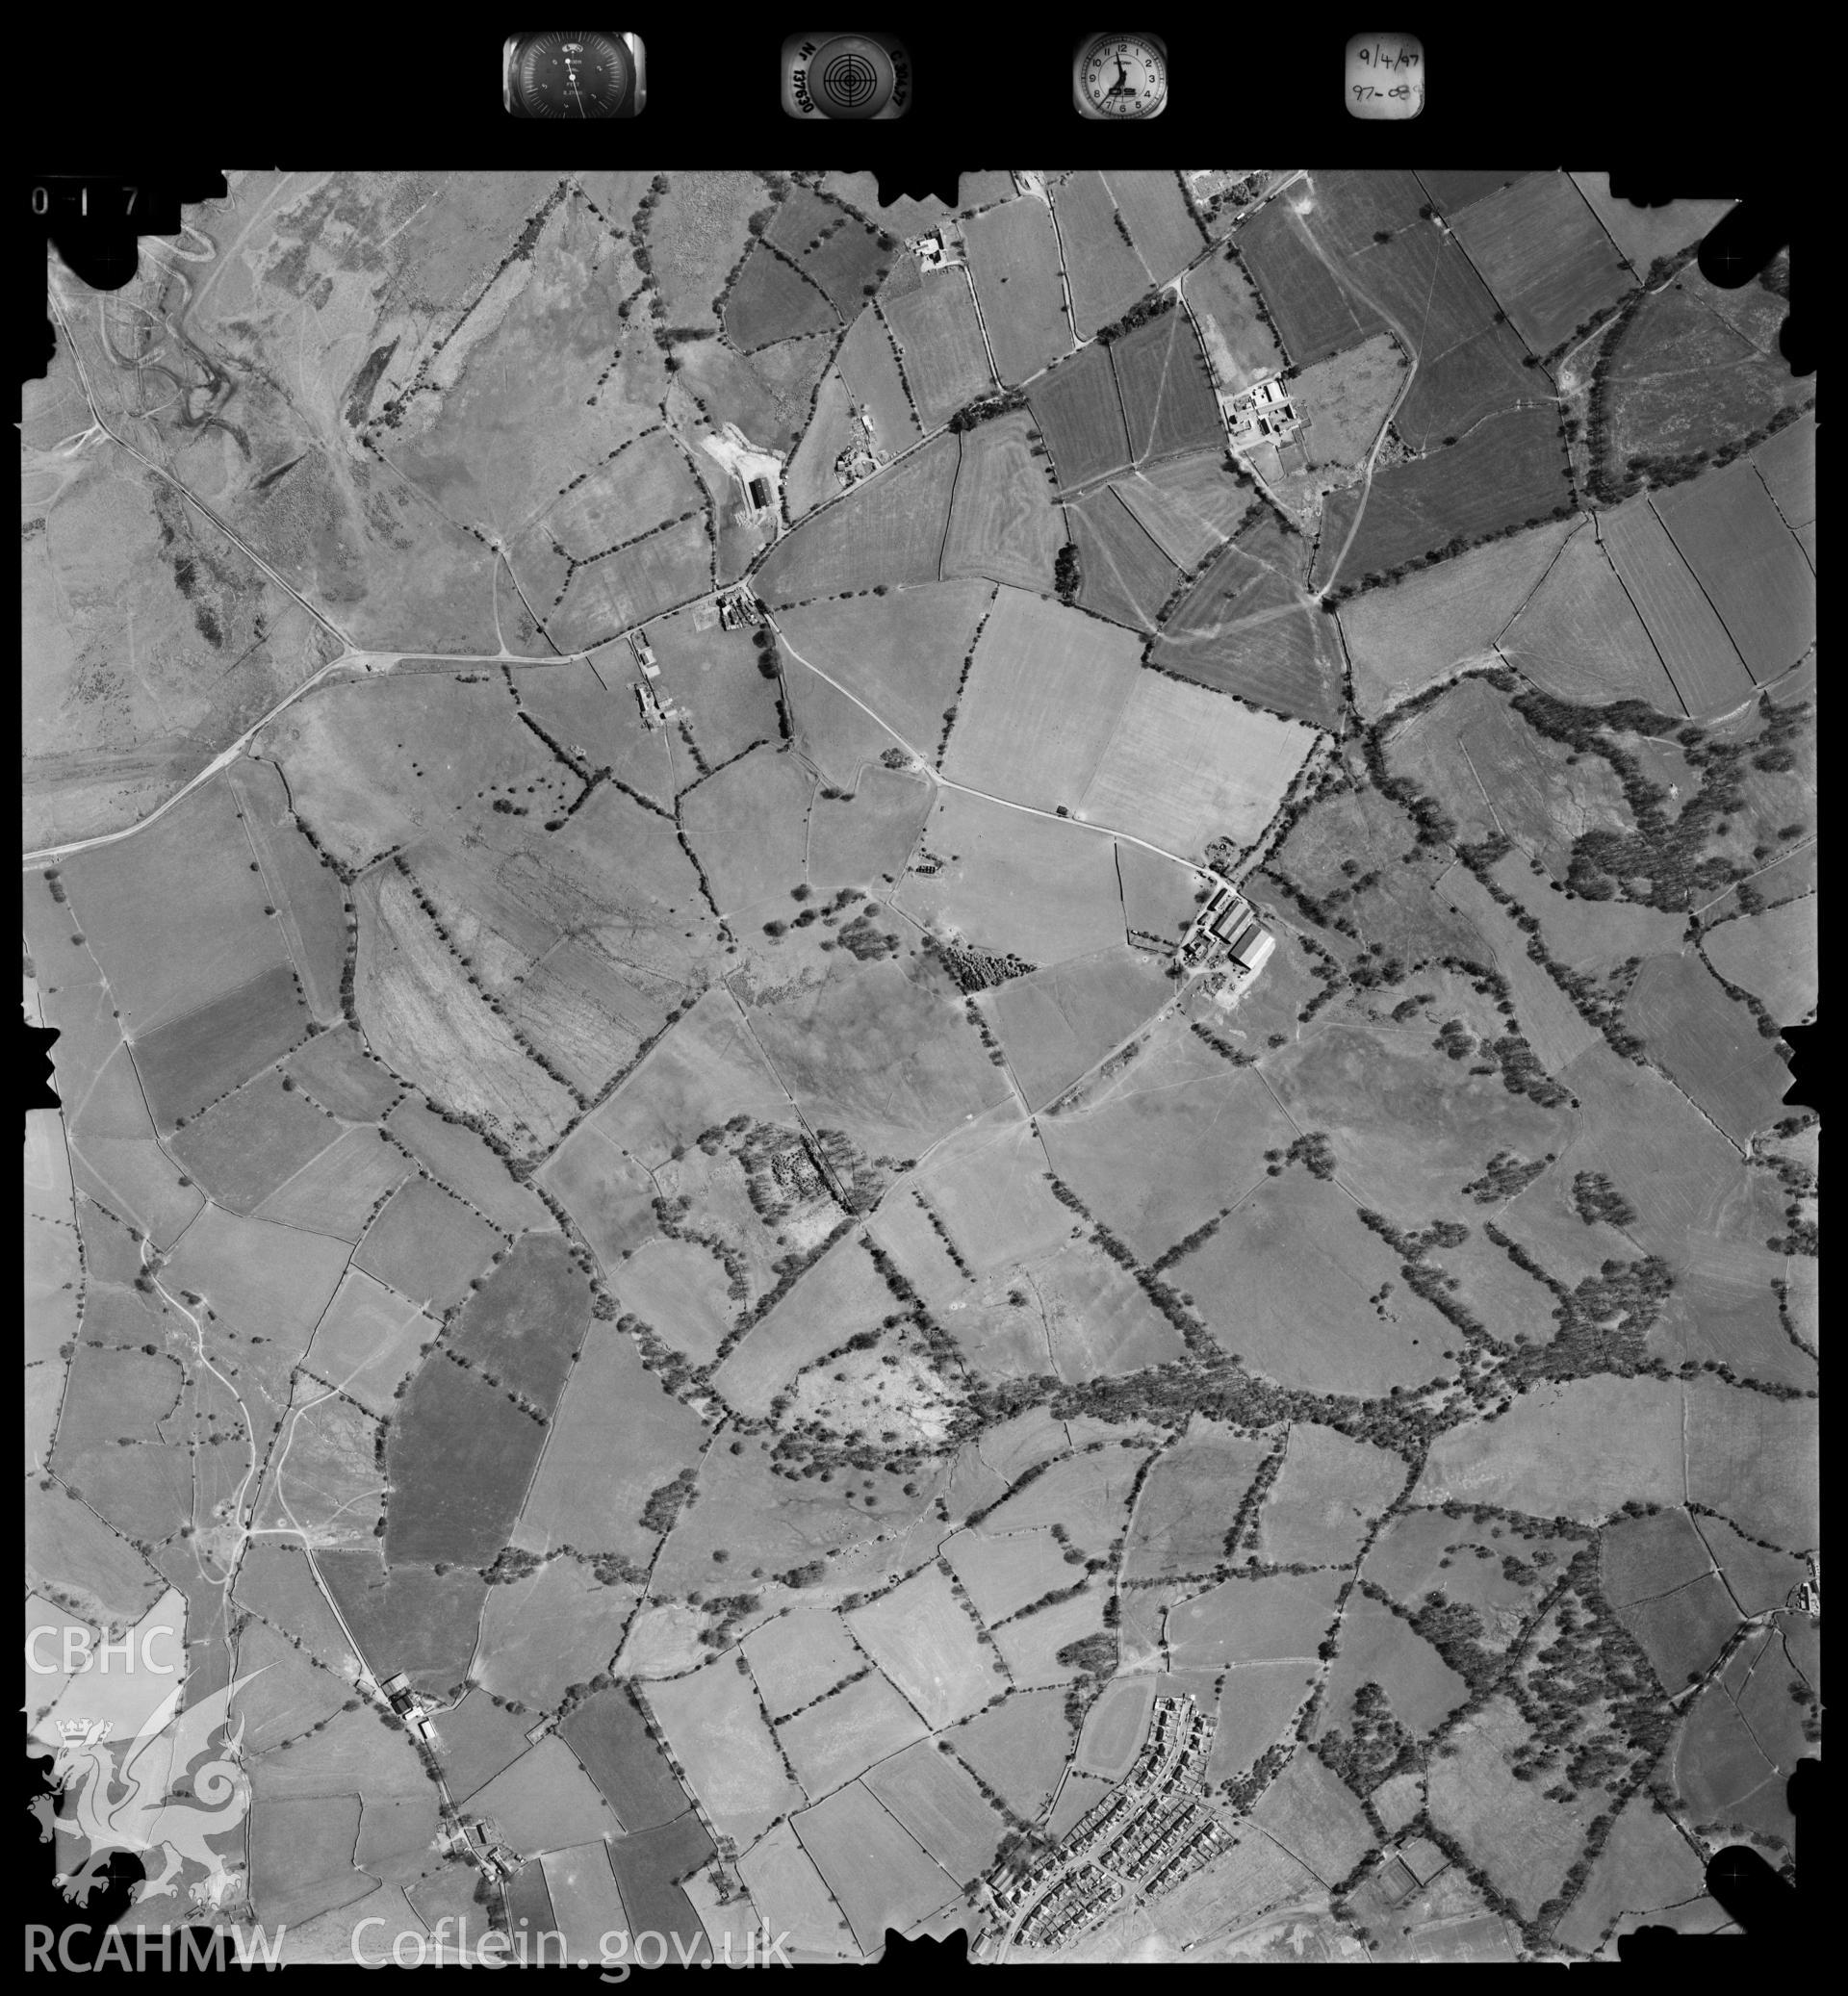 Digitized copy of an aerial photograph showing the area around Gelligaer Common, taken by Ordnance Survey, 1997.